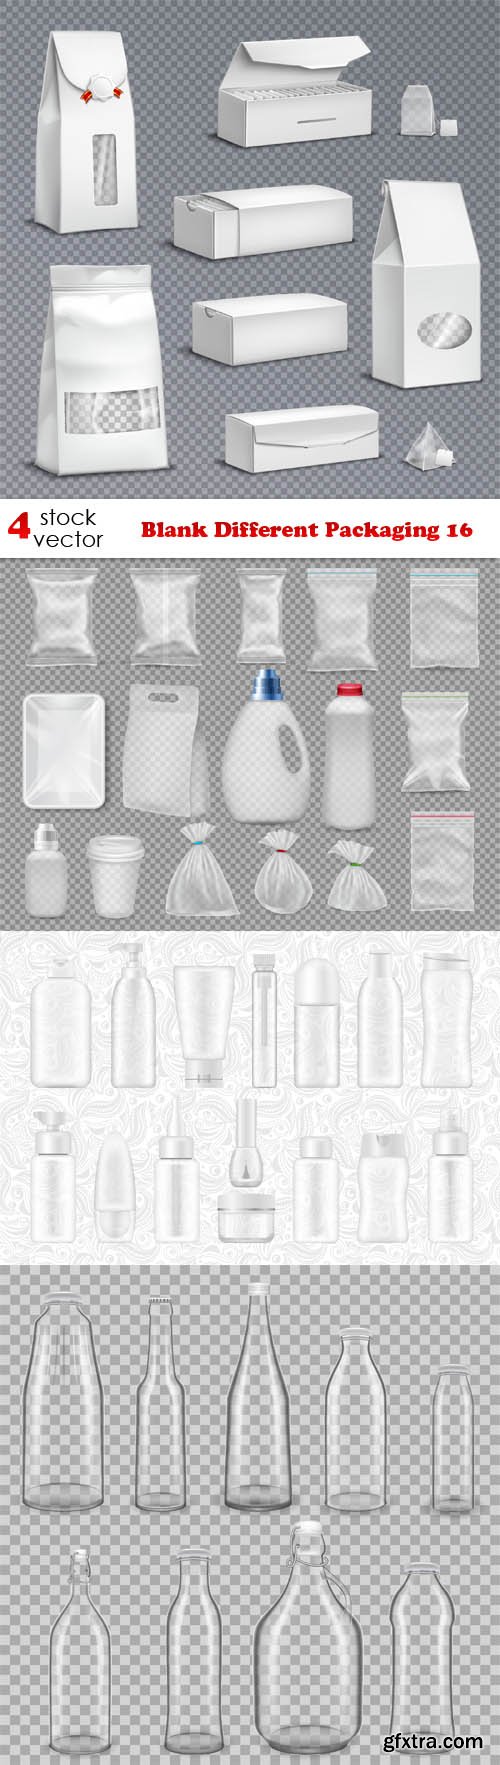 Vectors - Blank Different Packaging 16